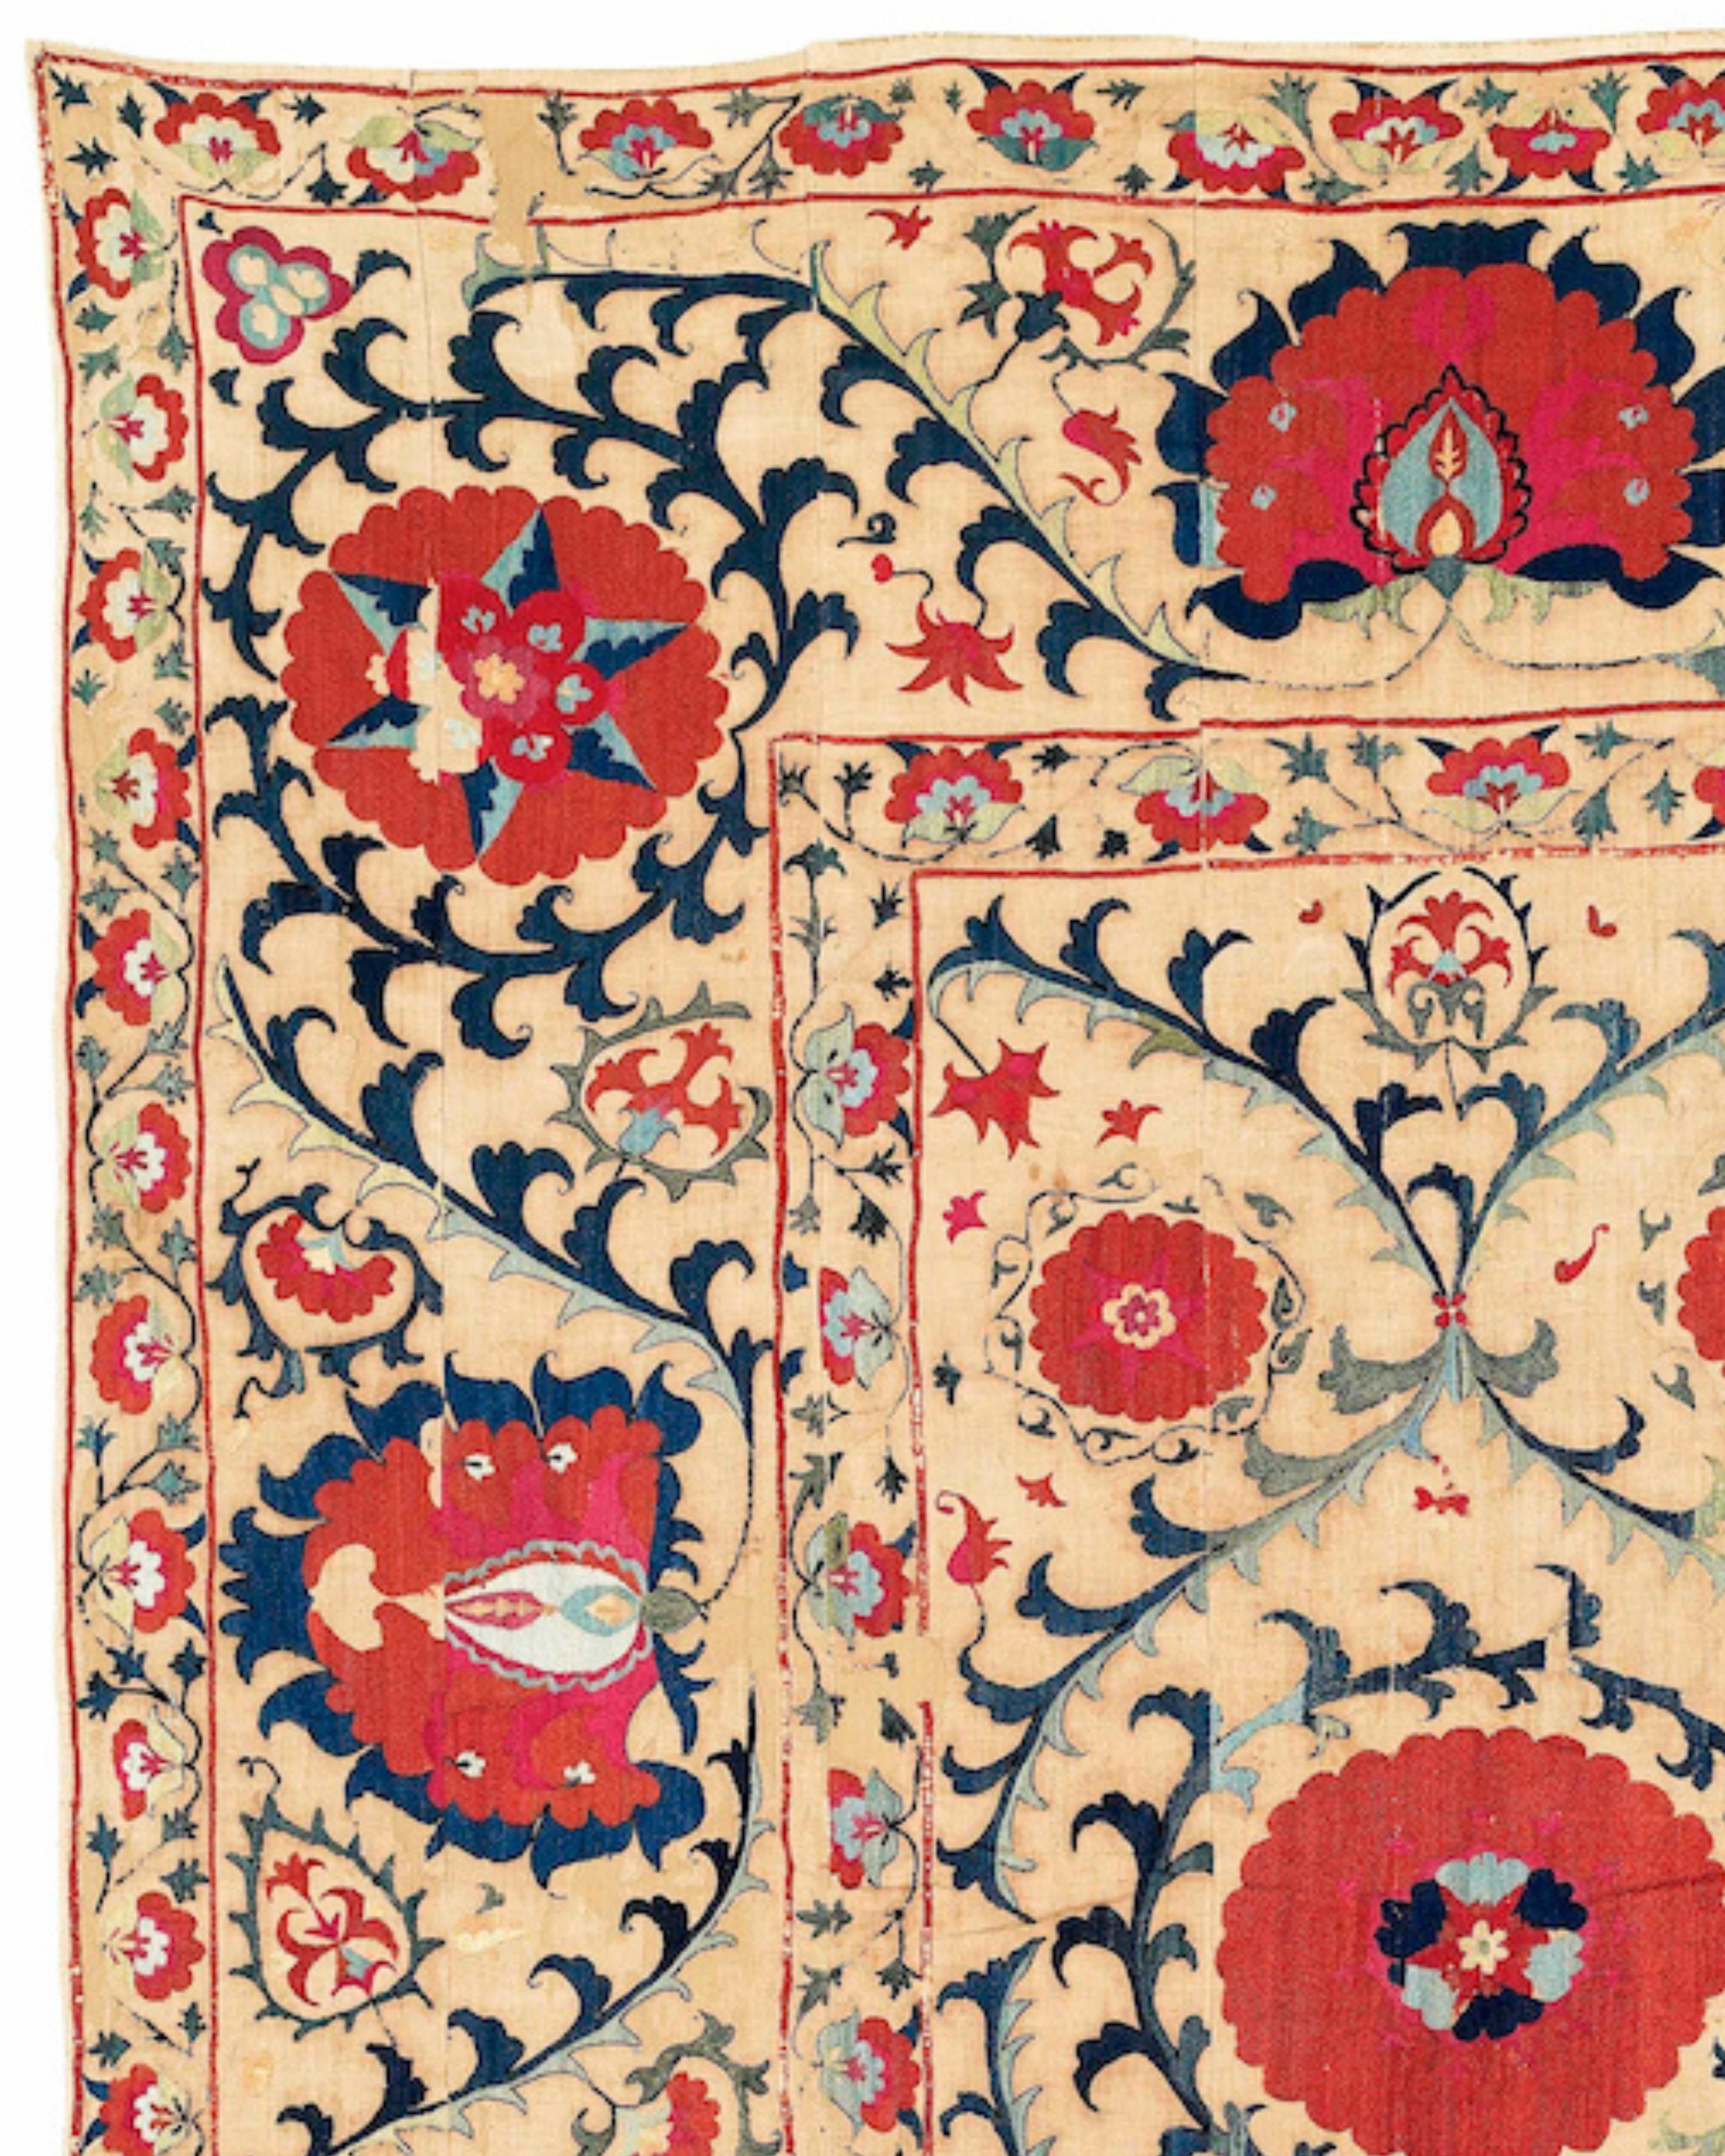 Antique Uzbek Suzani Embroidery Rug, c. 1800 In Good Condition For Sale In San Francisco, CA